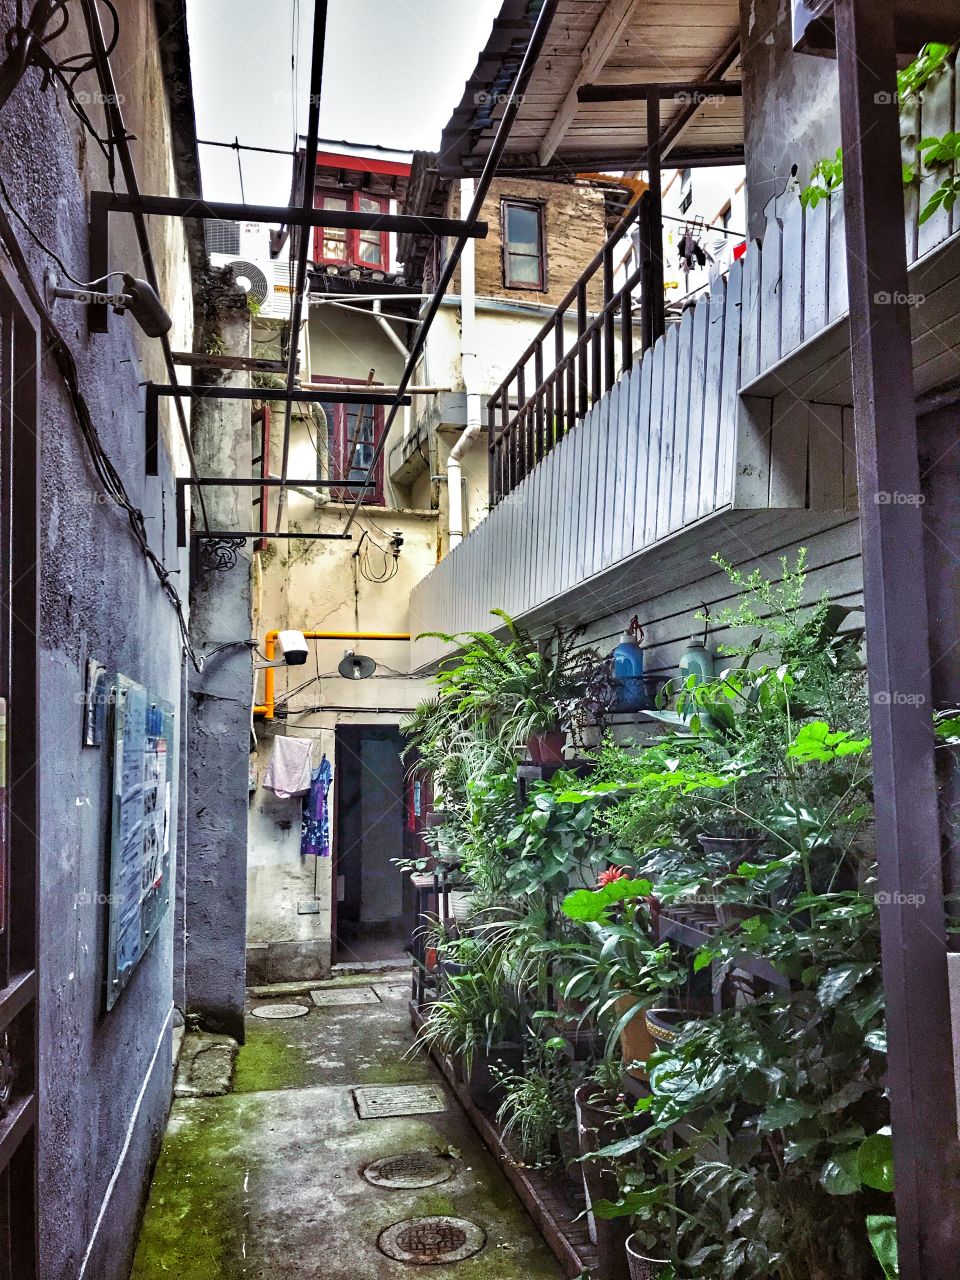 Shanghai evening - walking in the Changle Road area in Puxi - exploring the rich architectural heritage